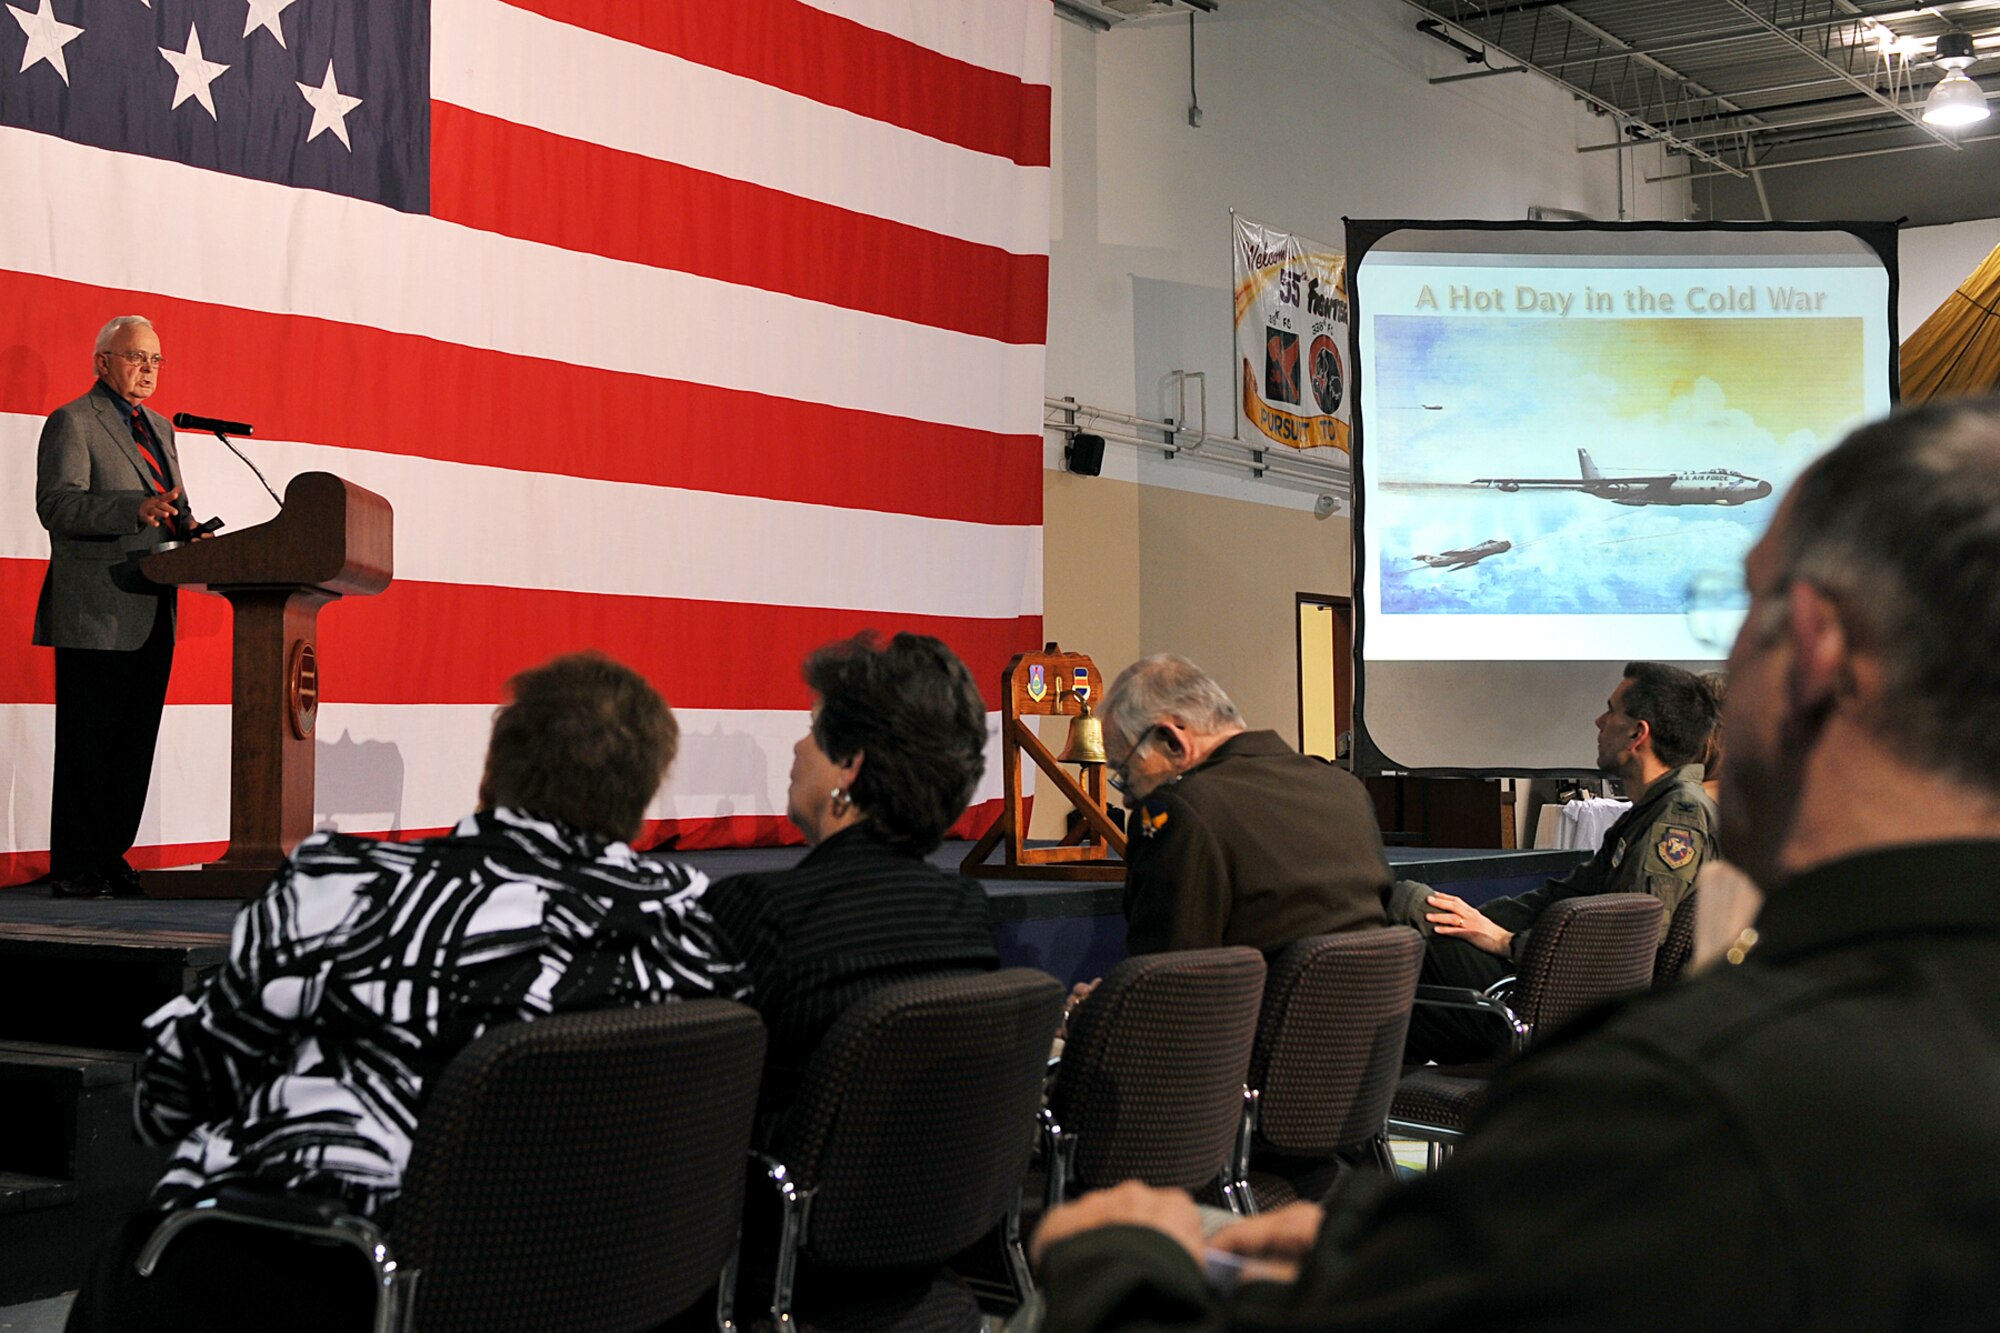 OFFUTT AIR FORCE BASE, Neb. - Hank Dubuy, who was a RB-47H copilot in 1965, talks to team Offutt about one of his reconnaissance mission during the Cold War as a part of the Tales of the 55th ceremony at the James M. McCoy Airman Leadership School April 9, 2010. The event held in conjunction with the 55th Wing Heritage Week, gave Team Offutt a chance to reflect on its heritage and hear stories from those who answered their nation call. U.S. Air Force photo by Charles Haymond